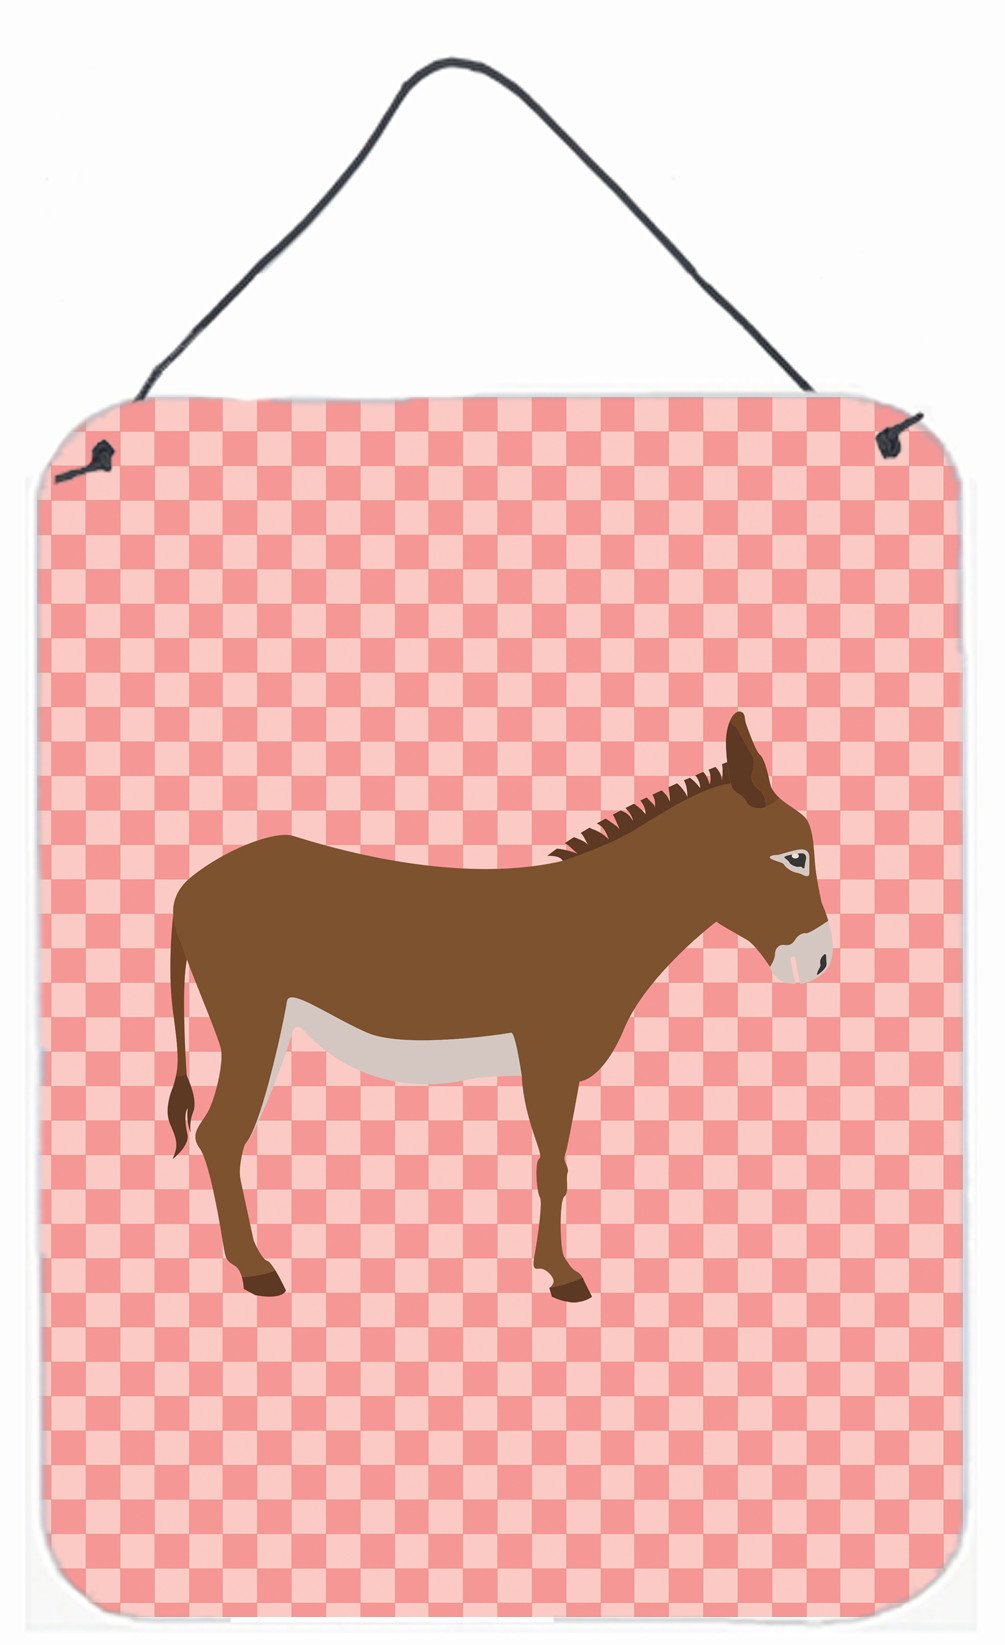 Cotentin Donkey Pink Check Wall or Door Hanging Prints BB7849DS1216 by Caroline's Treasures